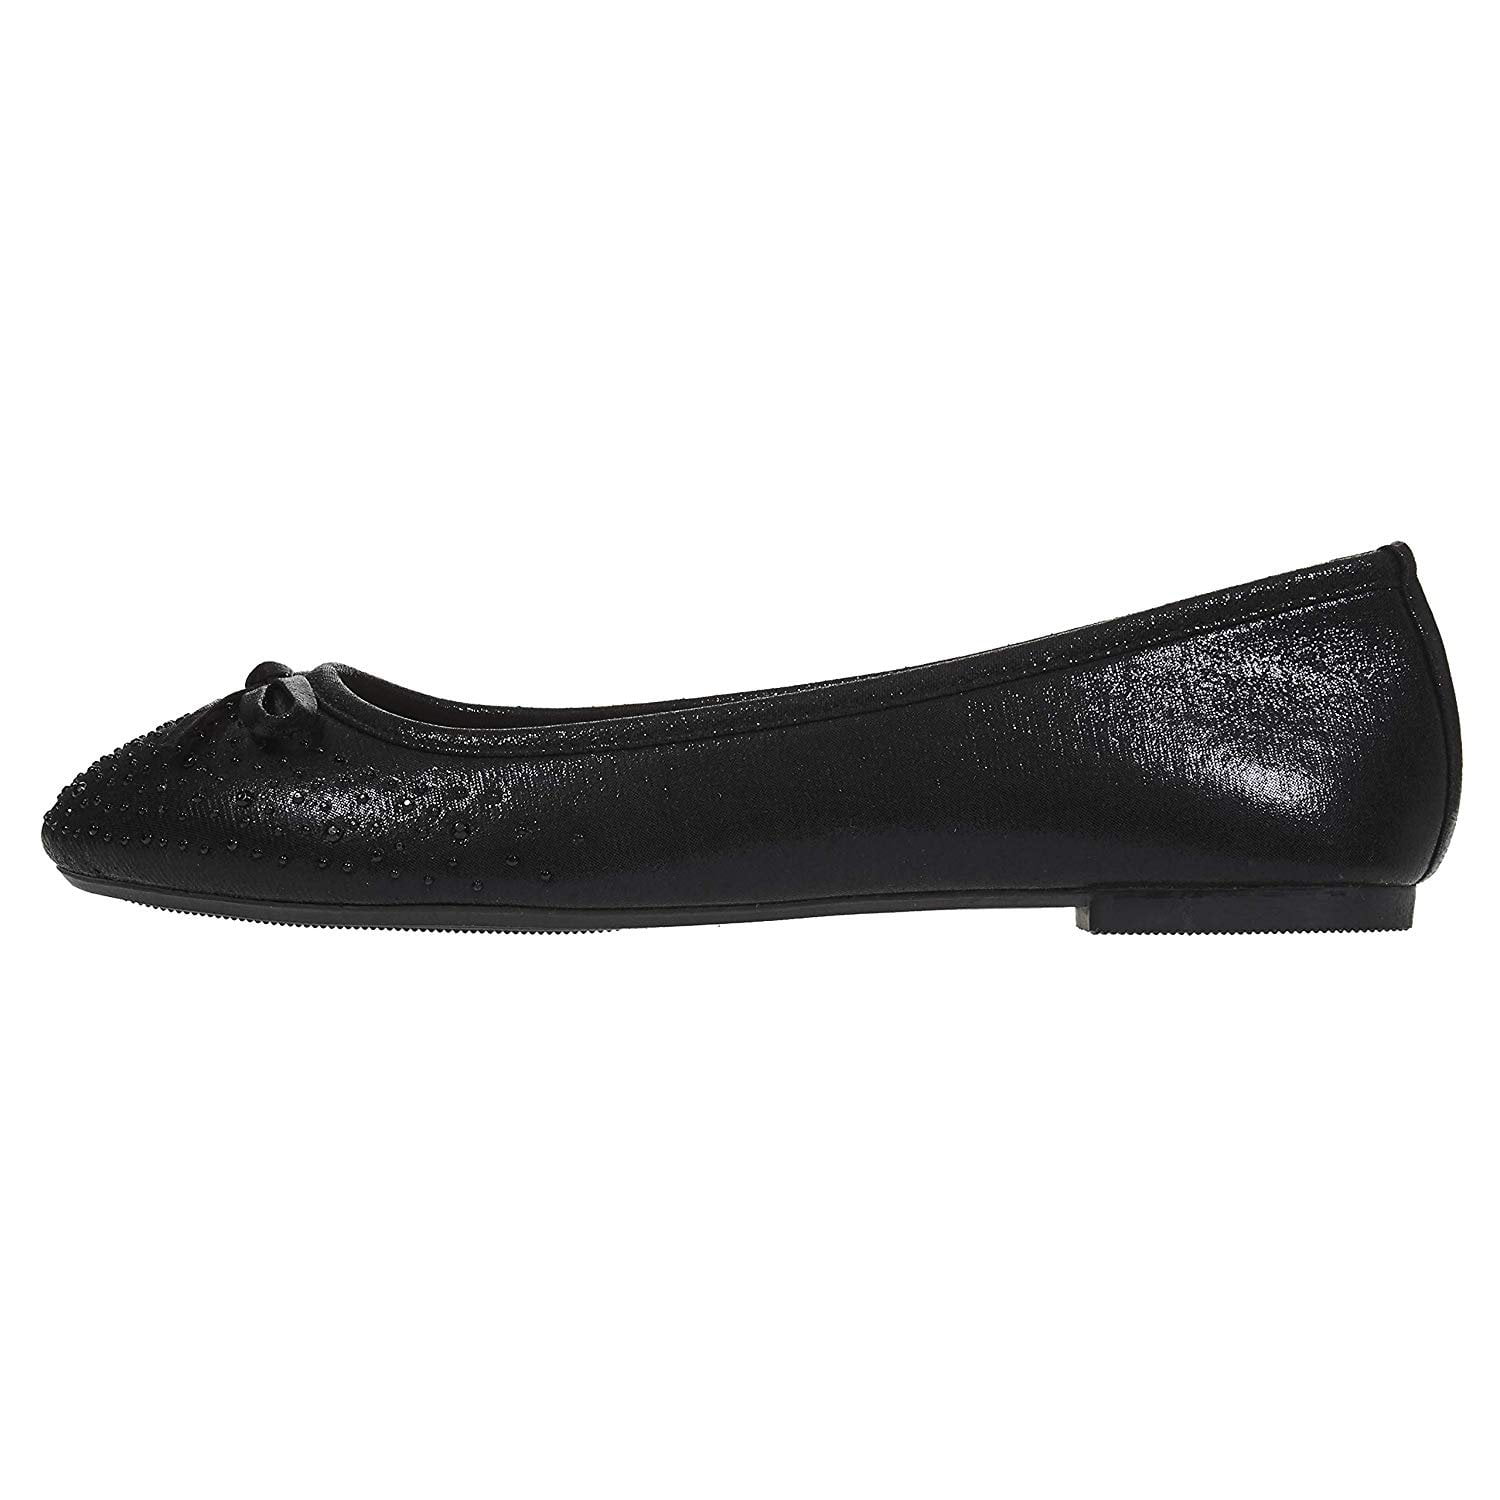 pointed toe flats size 5